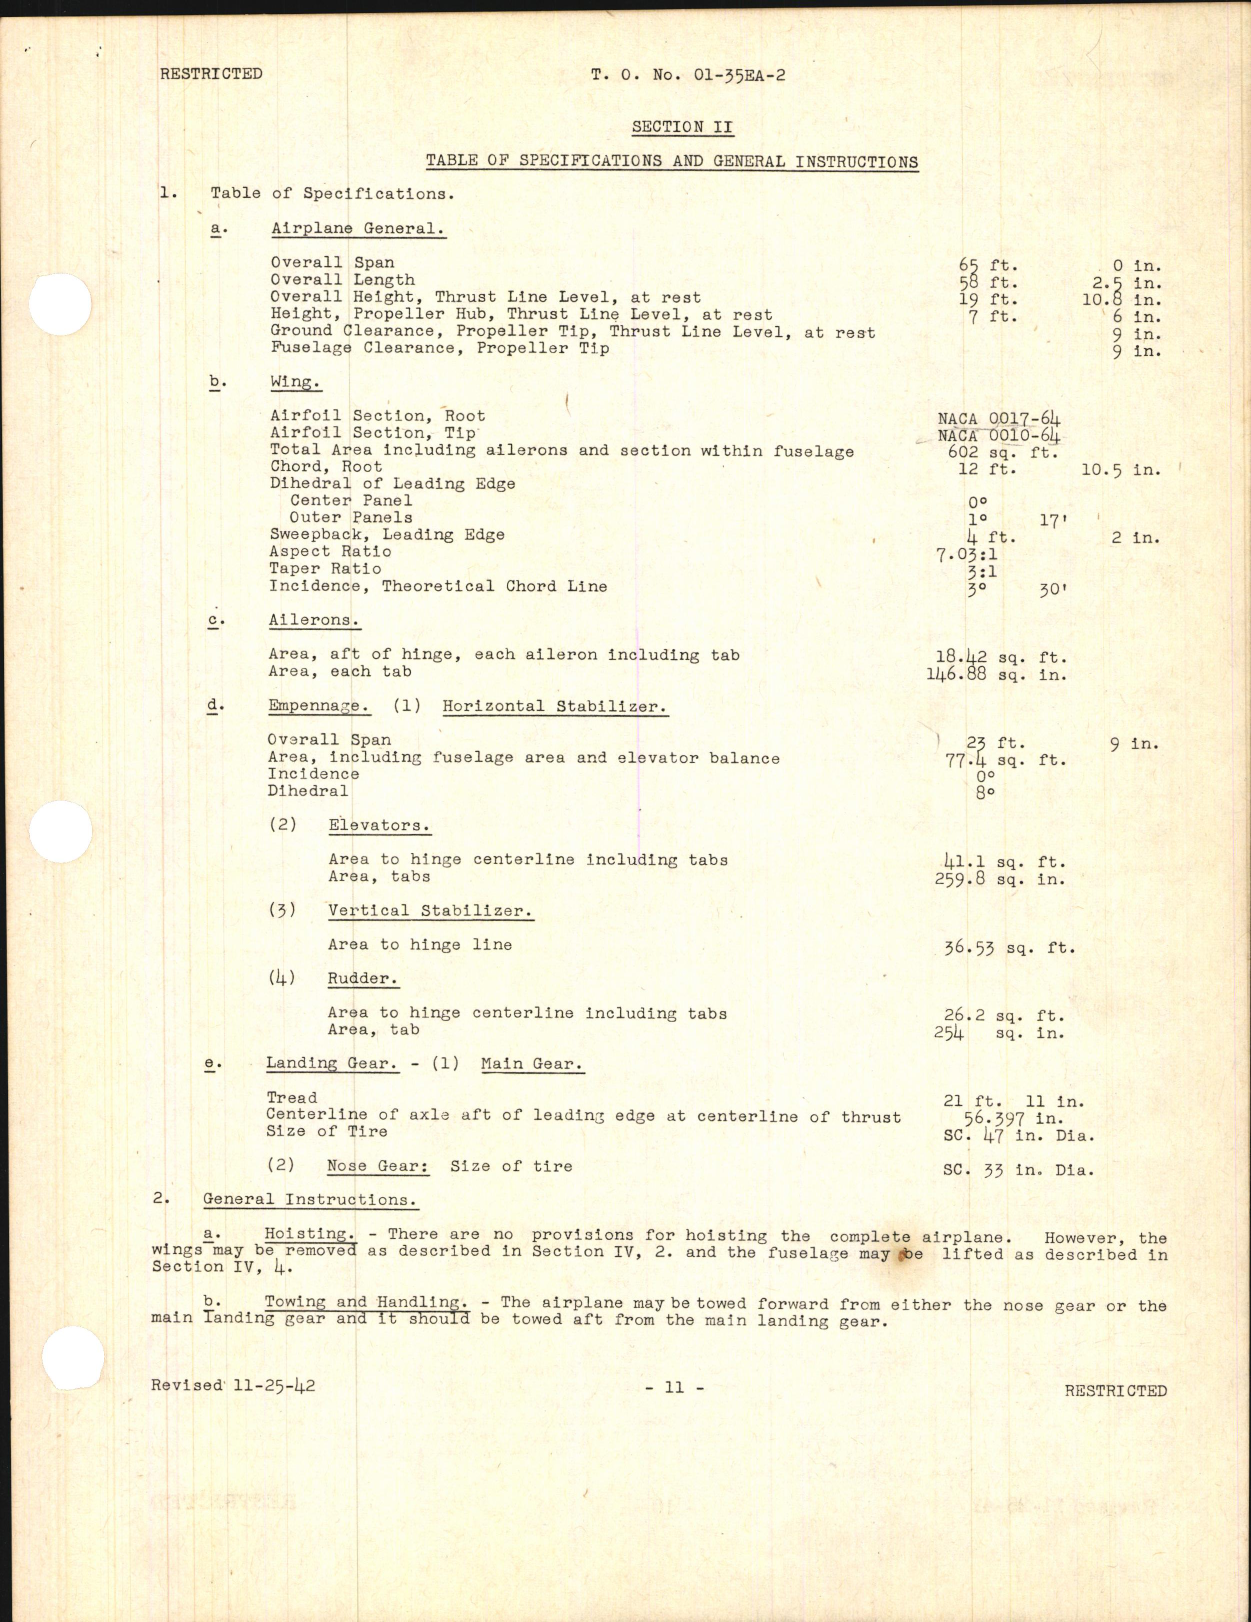 Sample page 9 from AirCorps Library document: Handbook of Service Instructions for B-26, B-26A, and B-26B Airplanes